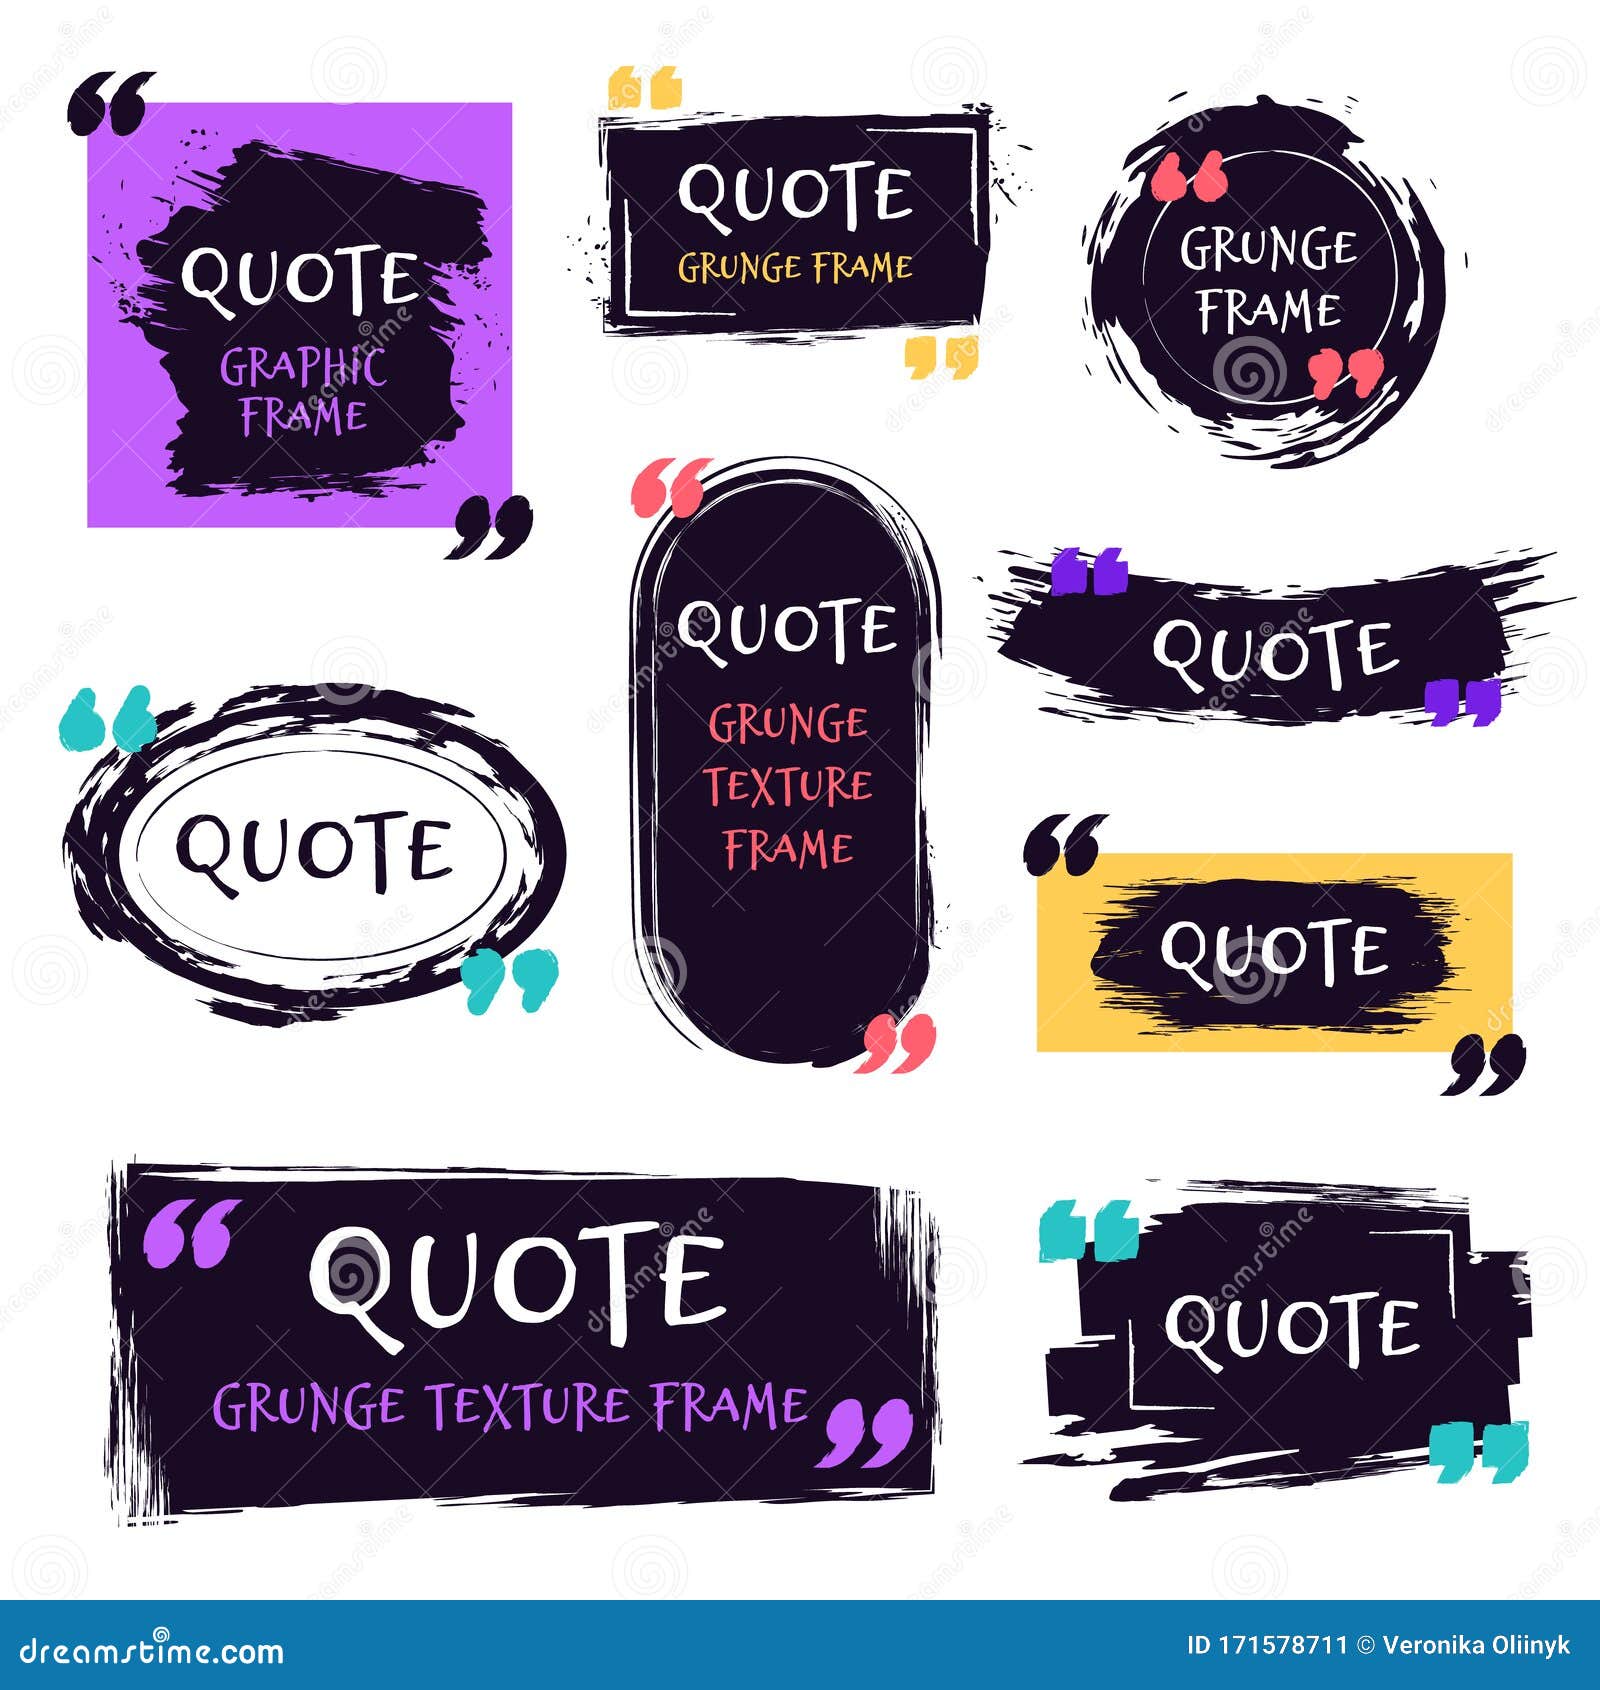 quote grunge textured box. decorative textured speech bubbles, quotes sketch brush label, rough dialog boxes templates